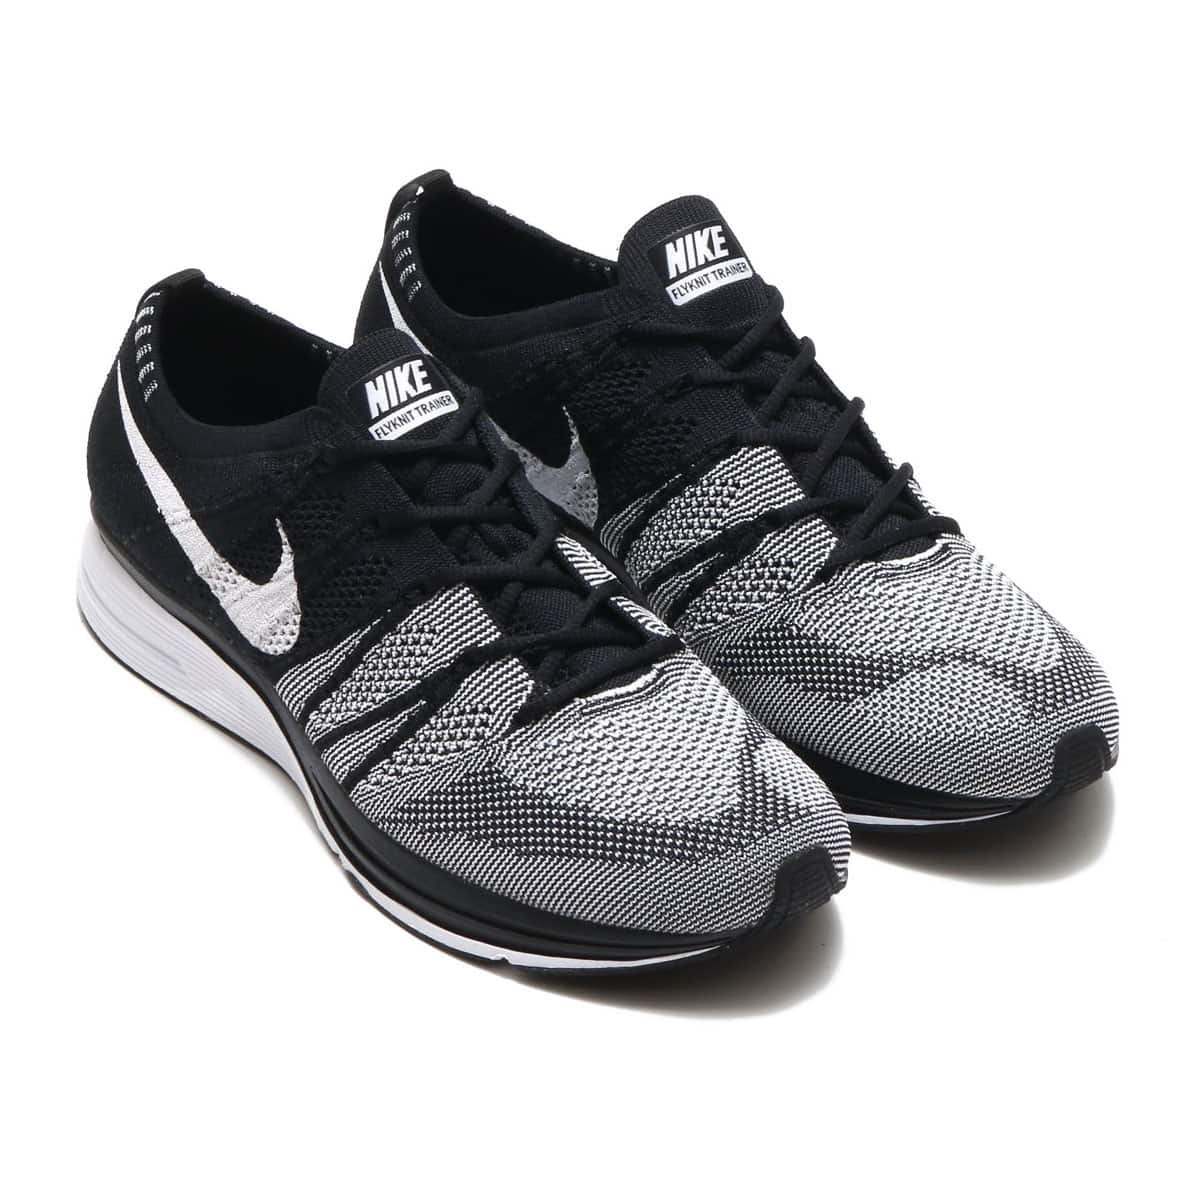 flyknit trainer black and white